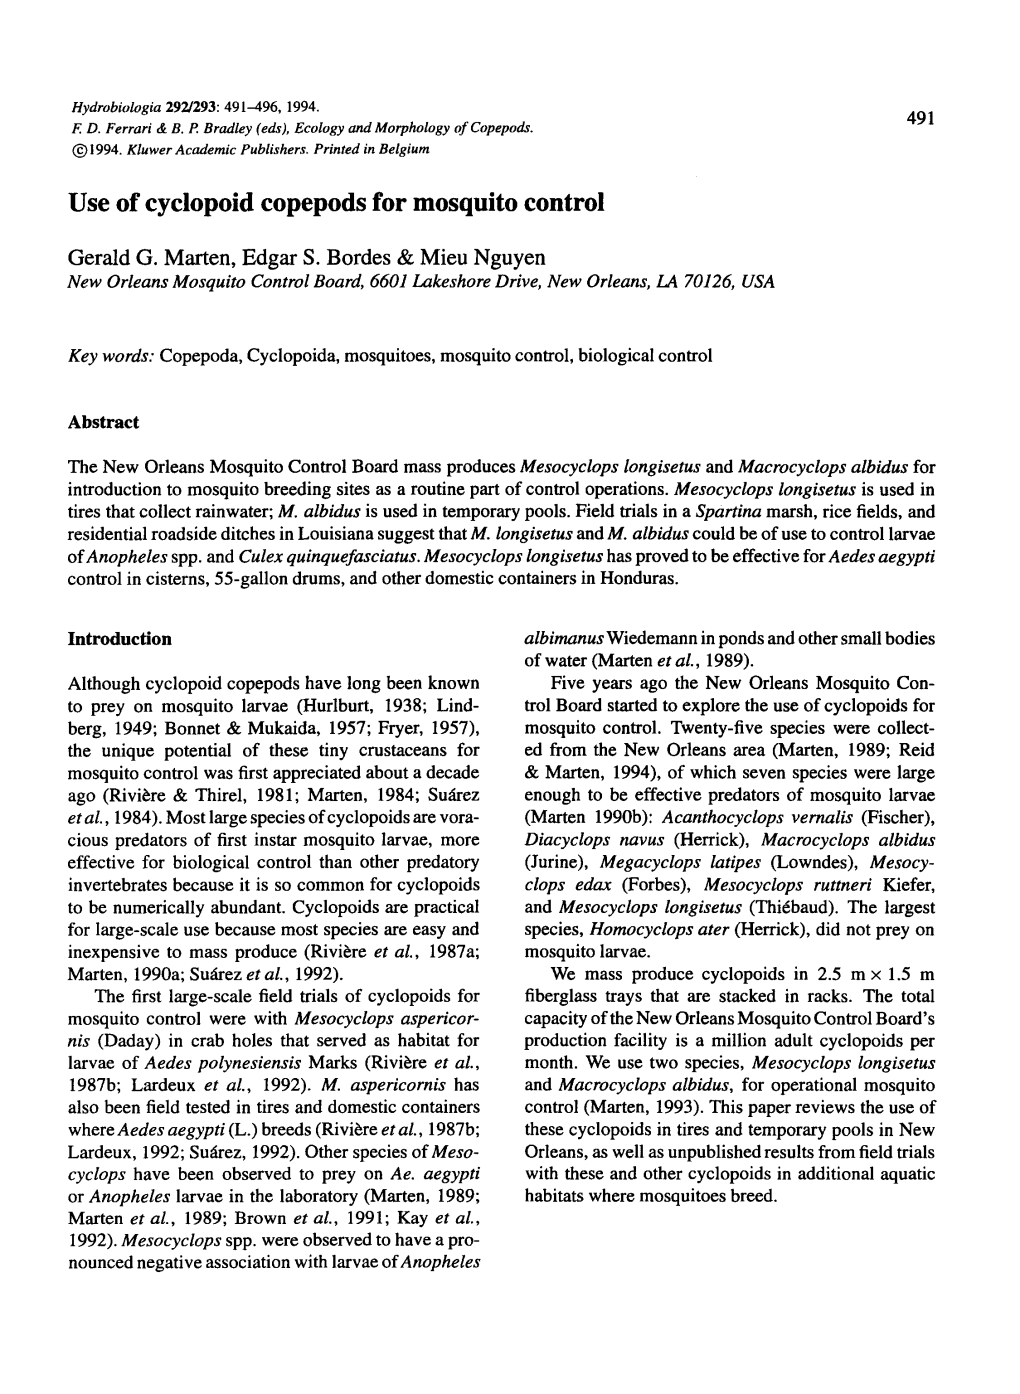 Use of Cyclopoid Copepods for Mosquito Control